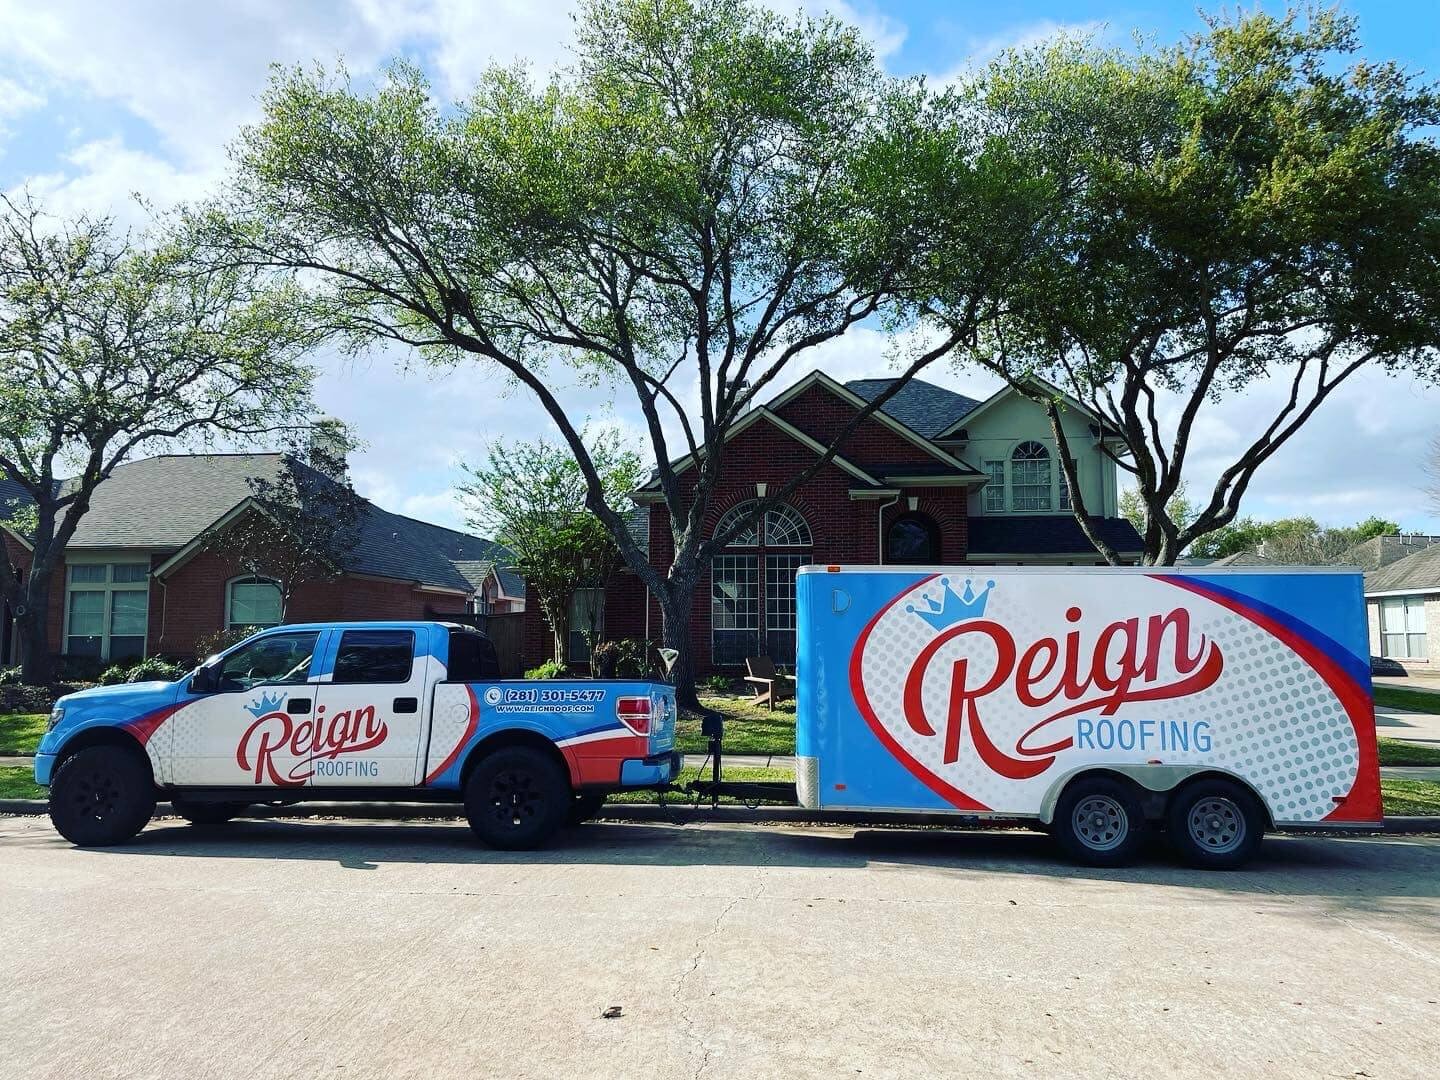 Reign Roofing Greater Houston area roofer